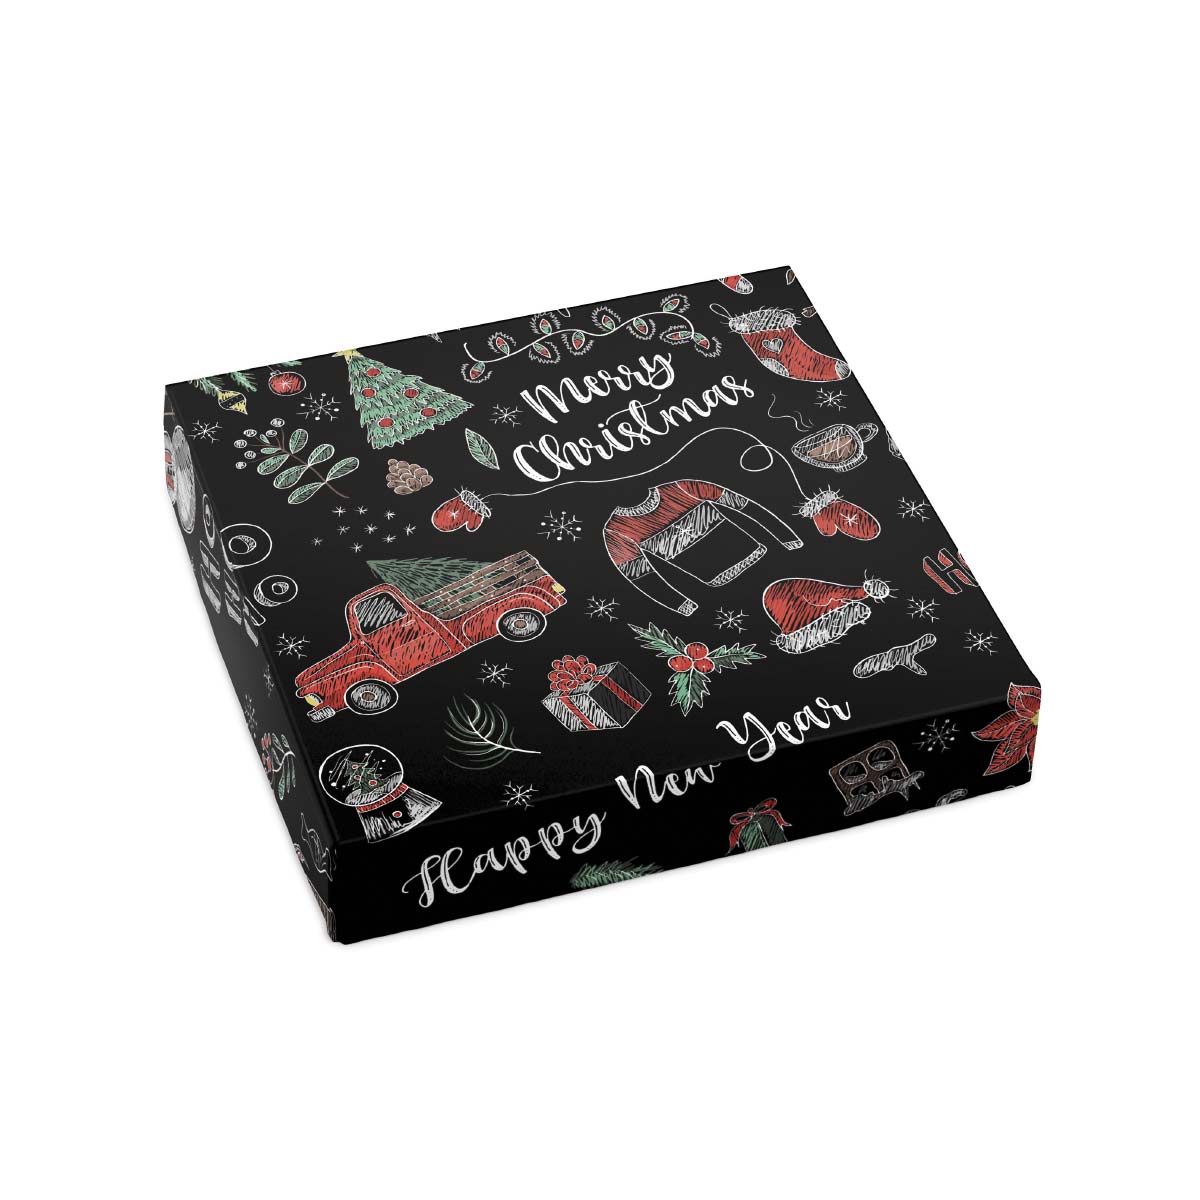 Chalkboard Merry Christmas and Happy New Year Assortment Cover for Chocolate Gift Box